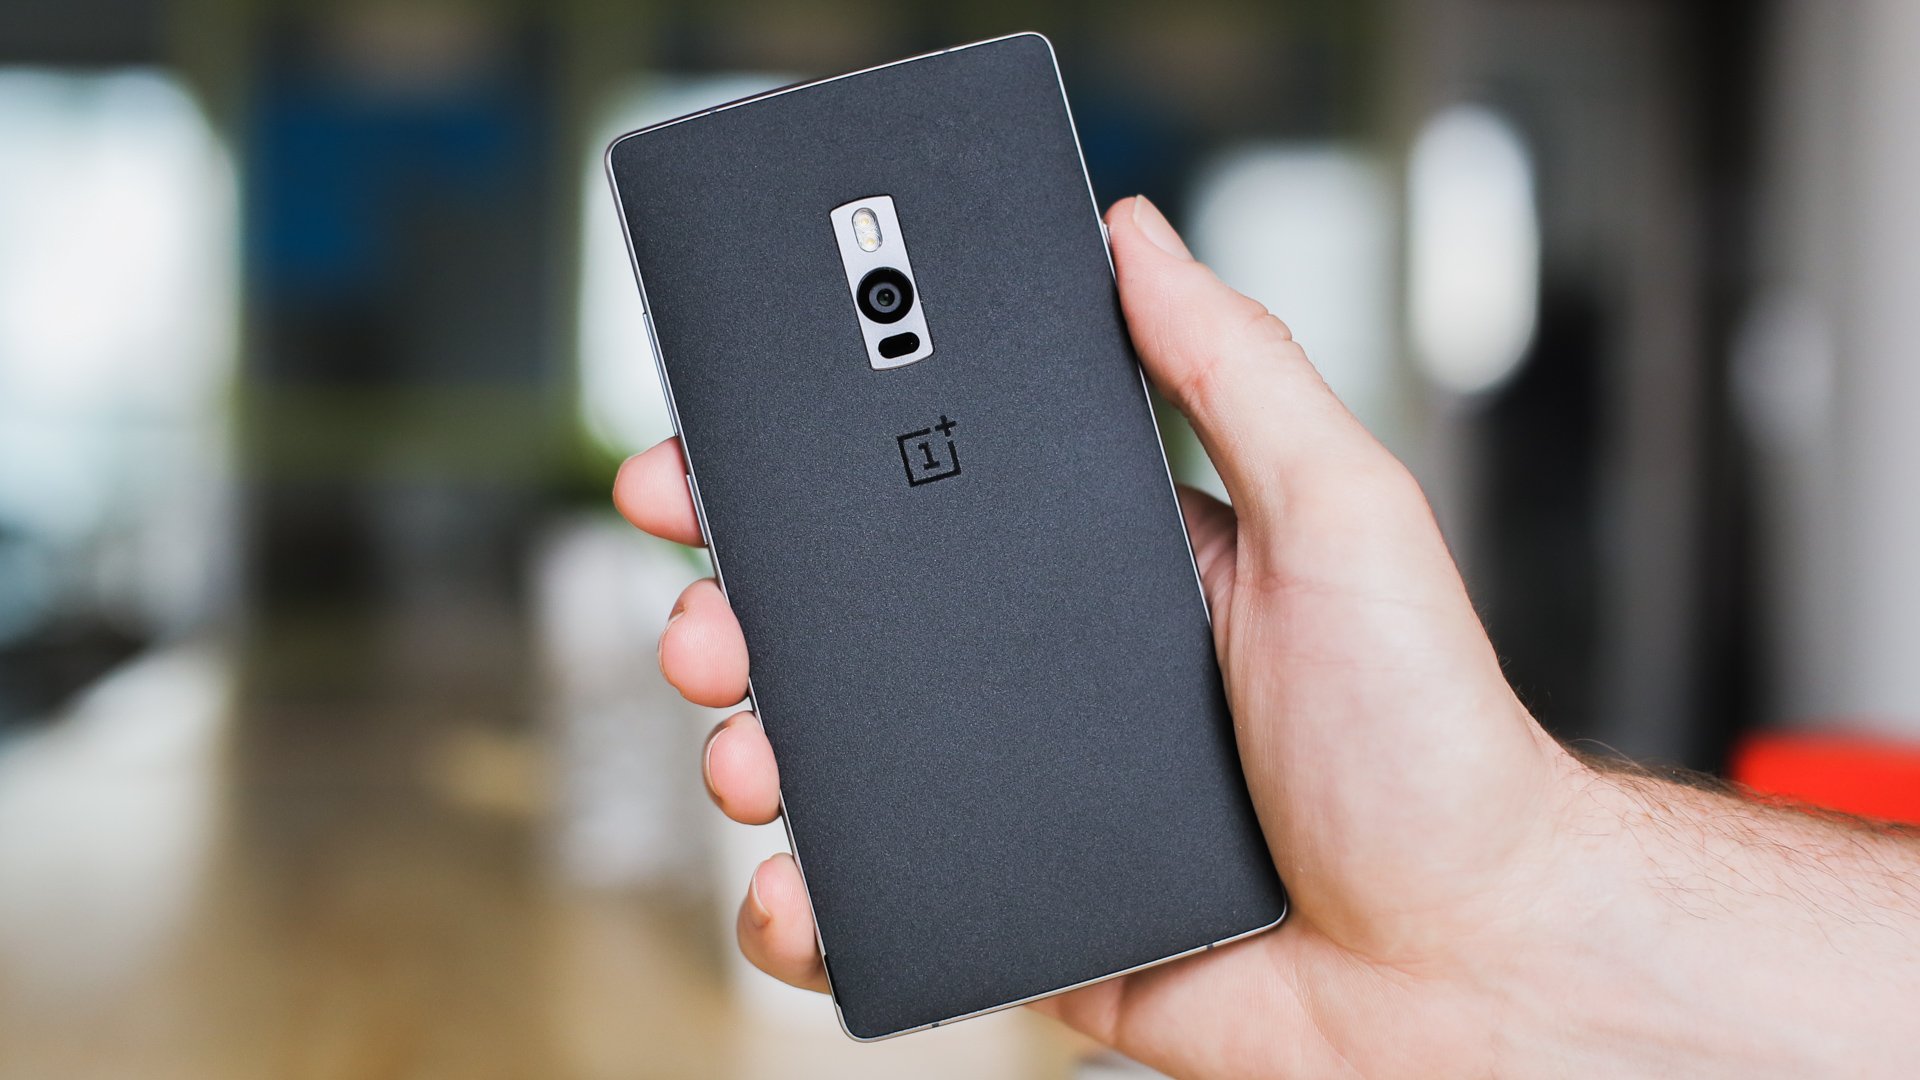 OnePlus 3 technical specifications